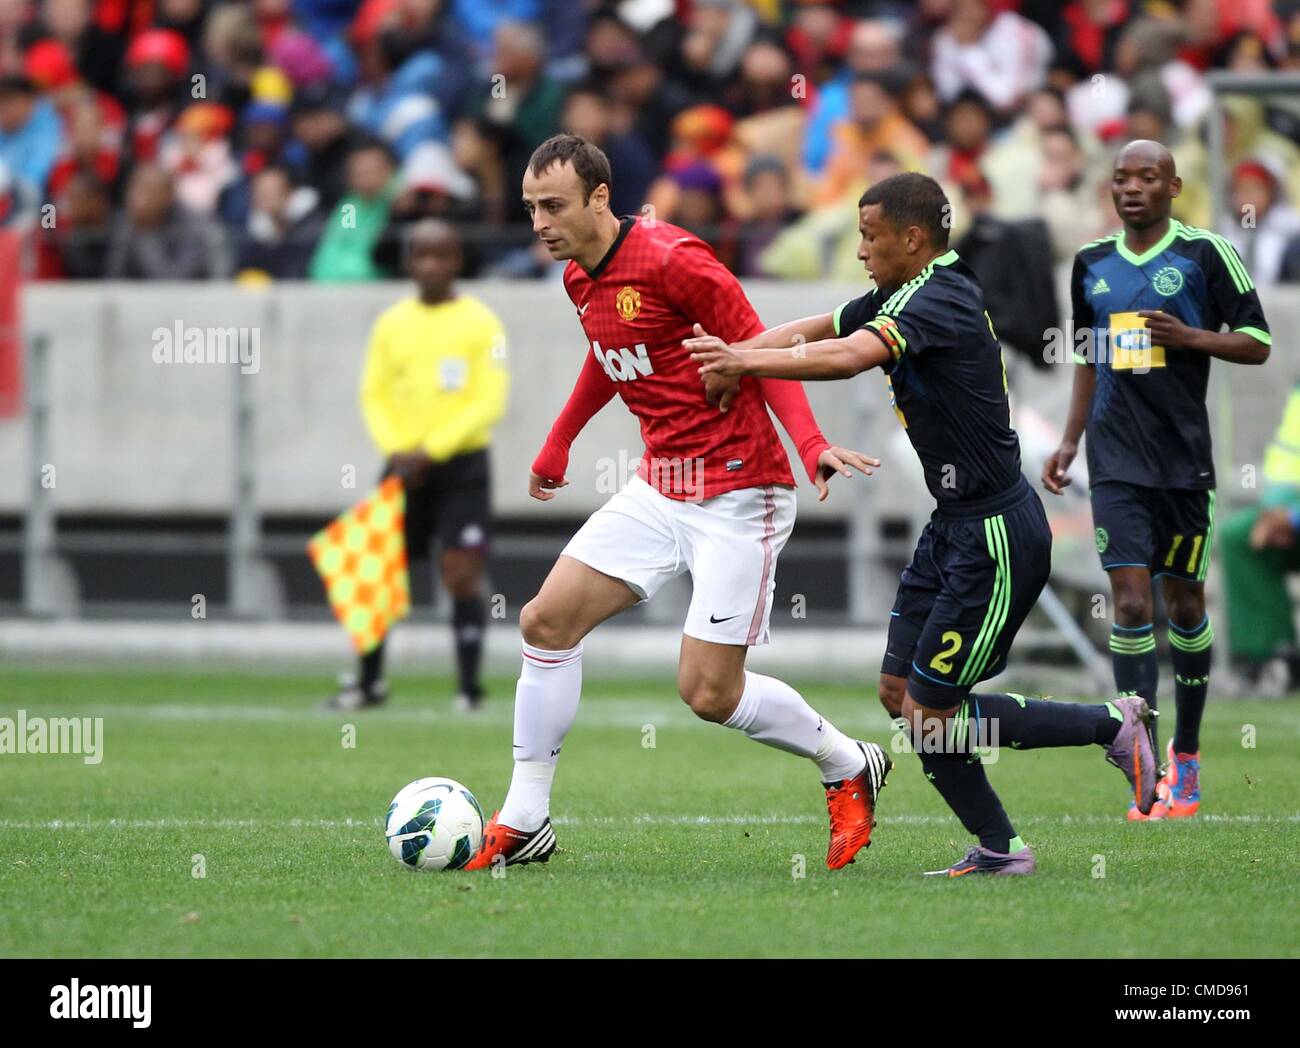 CAPE TOWN, SOUTH AFRICA - JULY 21, Dimitar Berbatov from Manchester United FC during the MTN Football Invitational match between Ajax Cape Town and Manchester United from Cape Town Stadium on July 21, 2012 in Cape Town, South Africa Photo by Luke Walker / Gallo Images Stock Photo